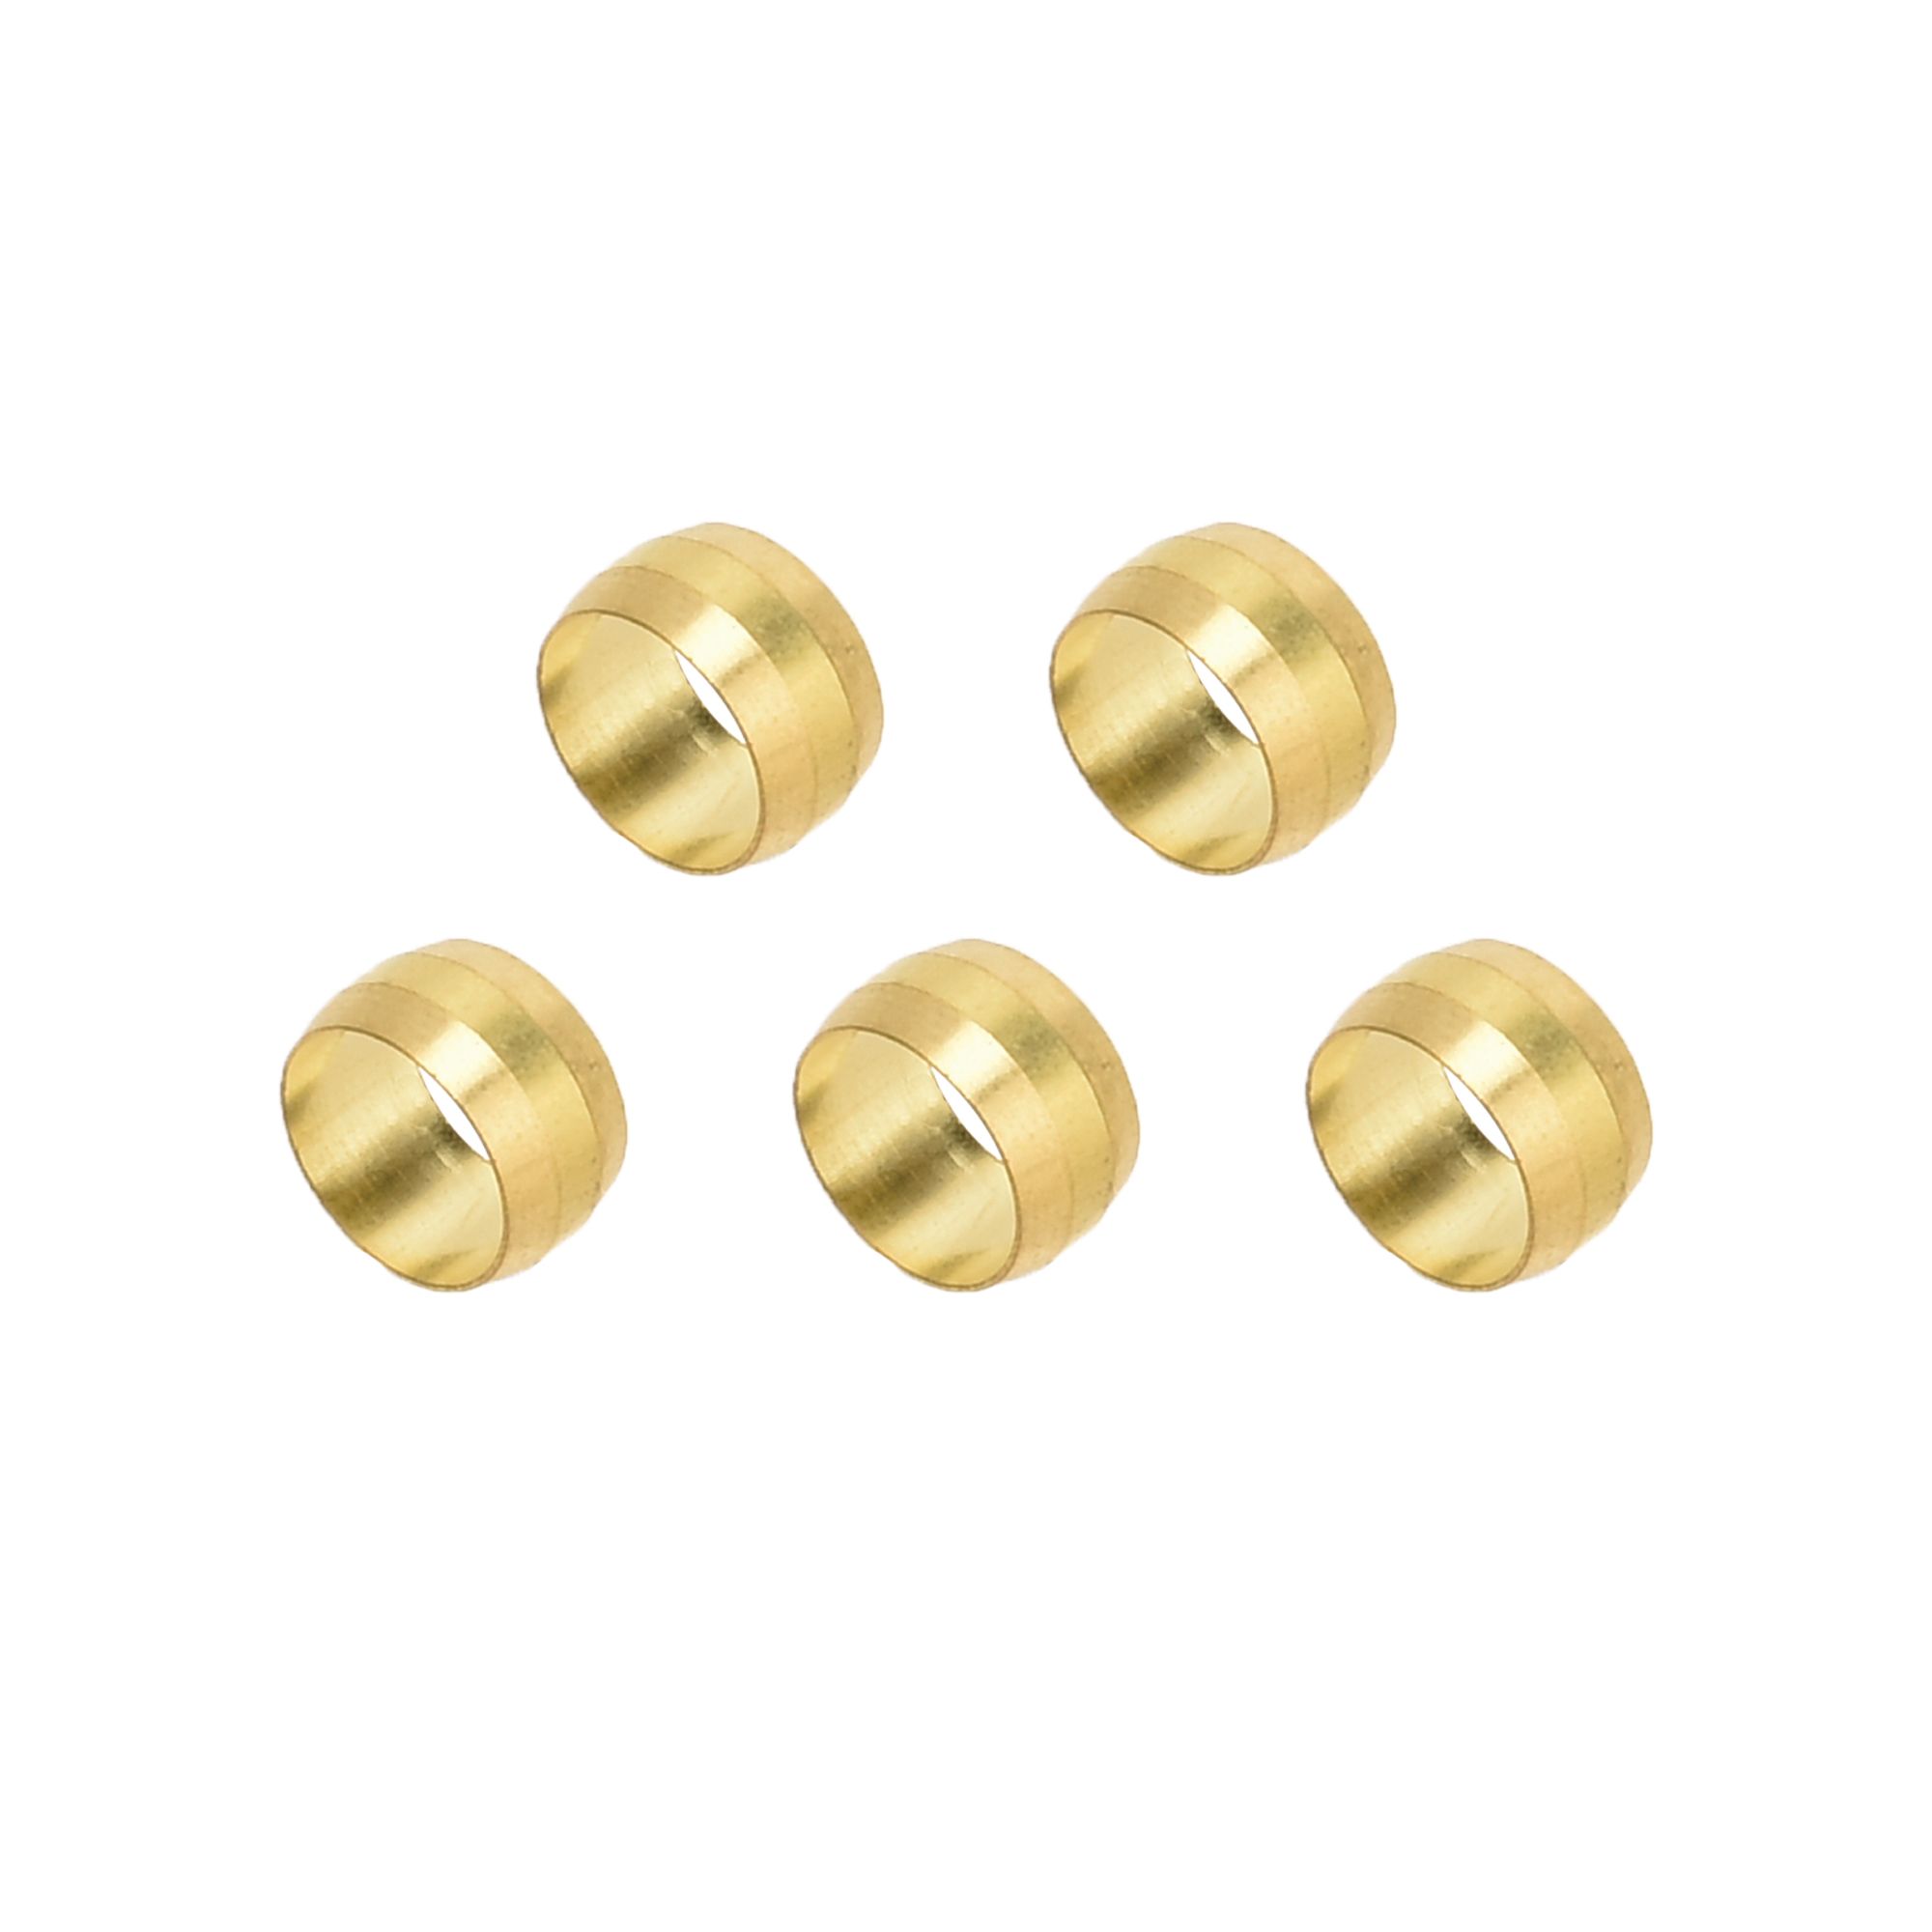 Flomasta Brass Compression Olive (Dia)15mm, Pack of 5